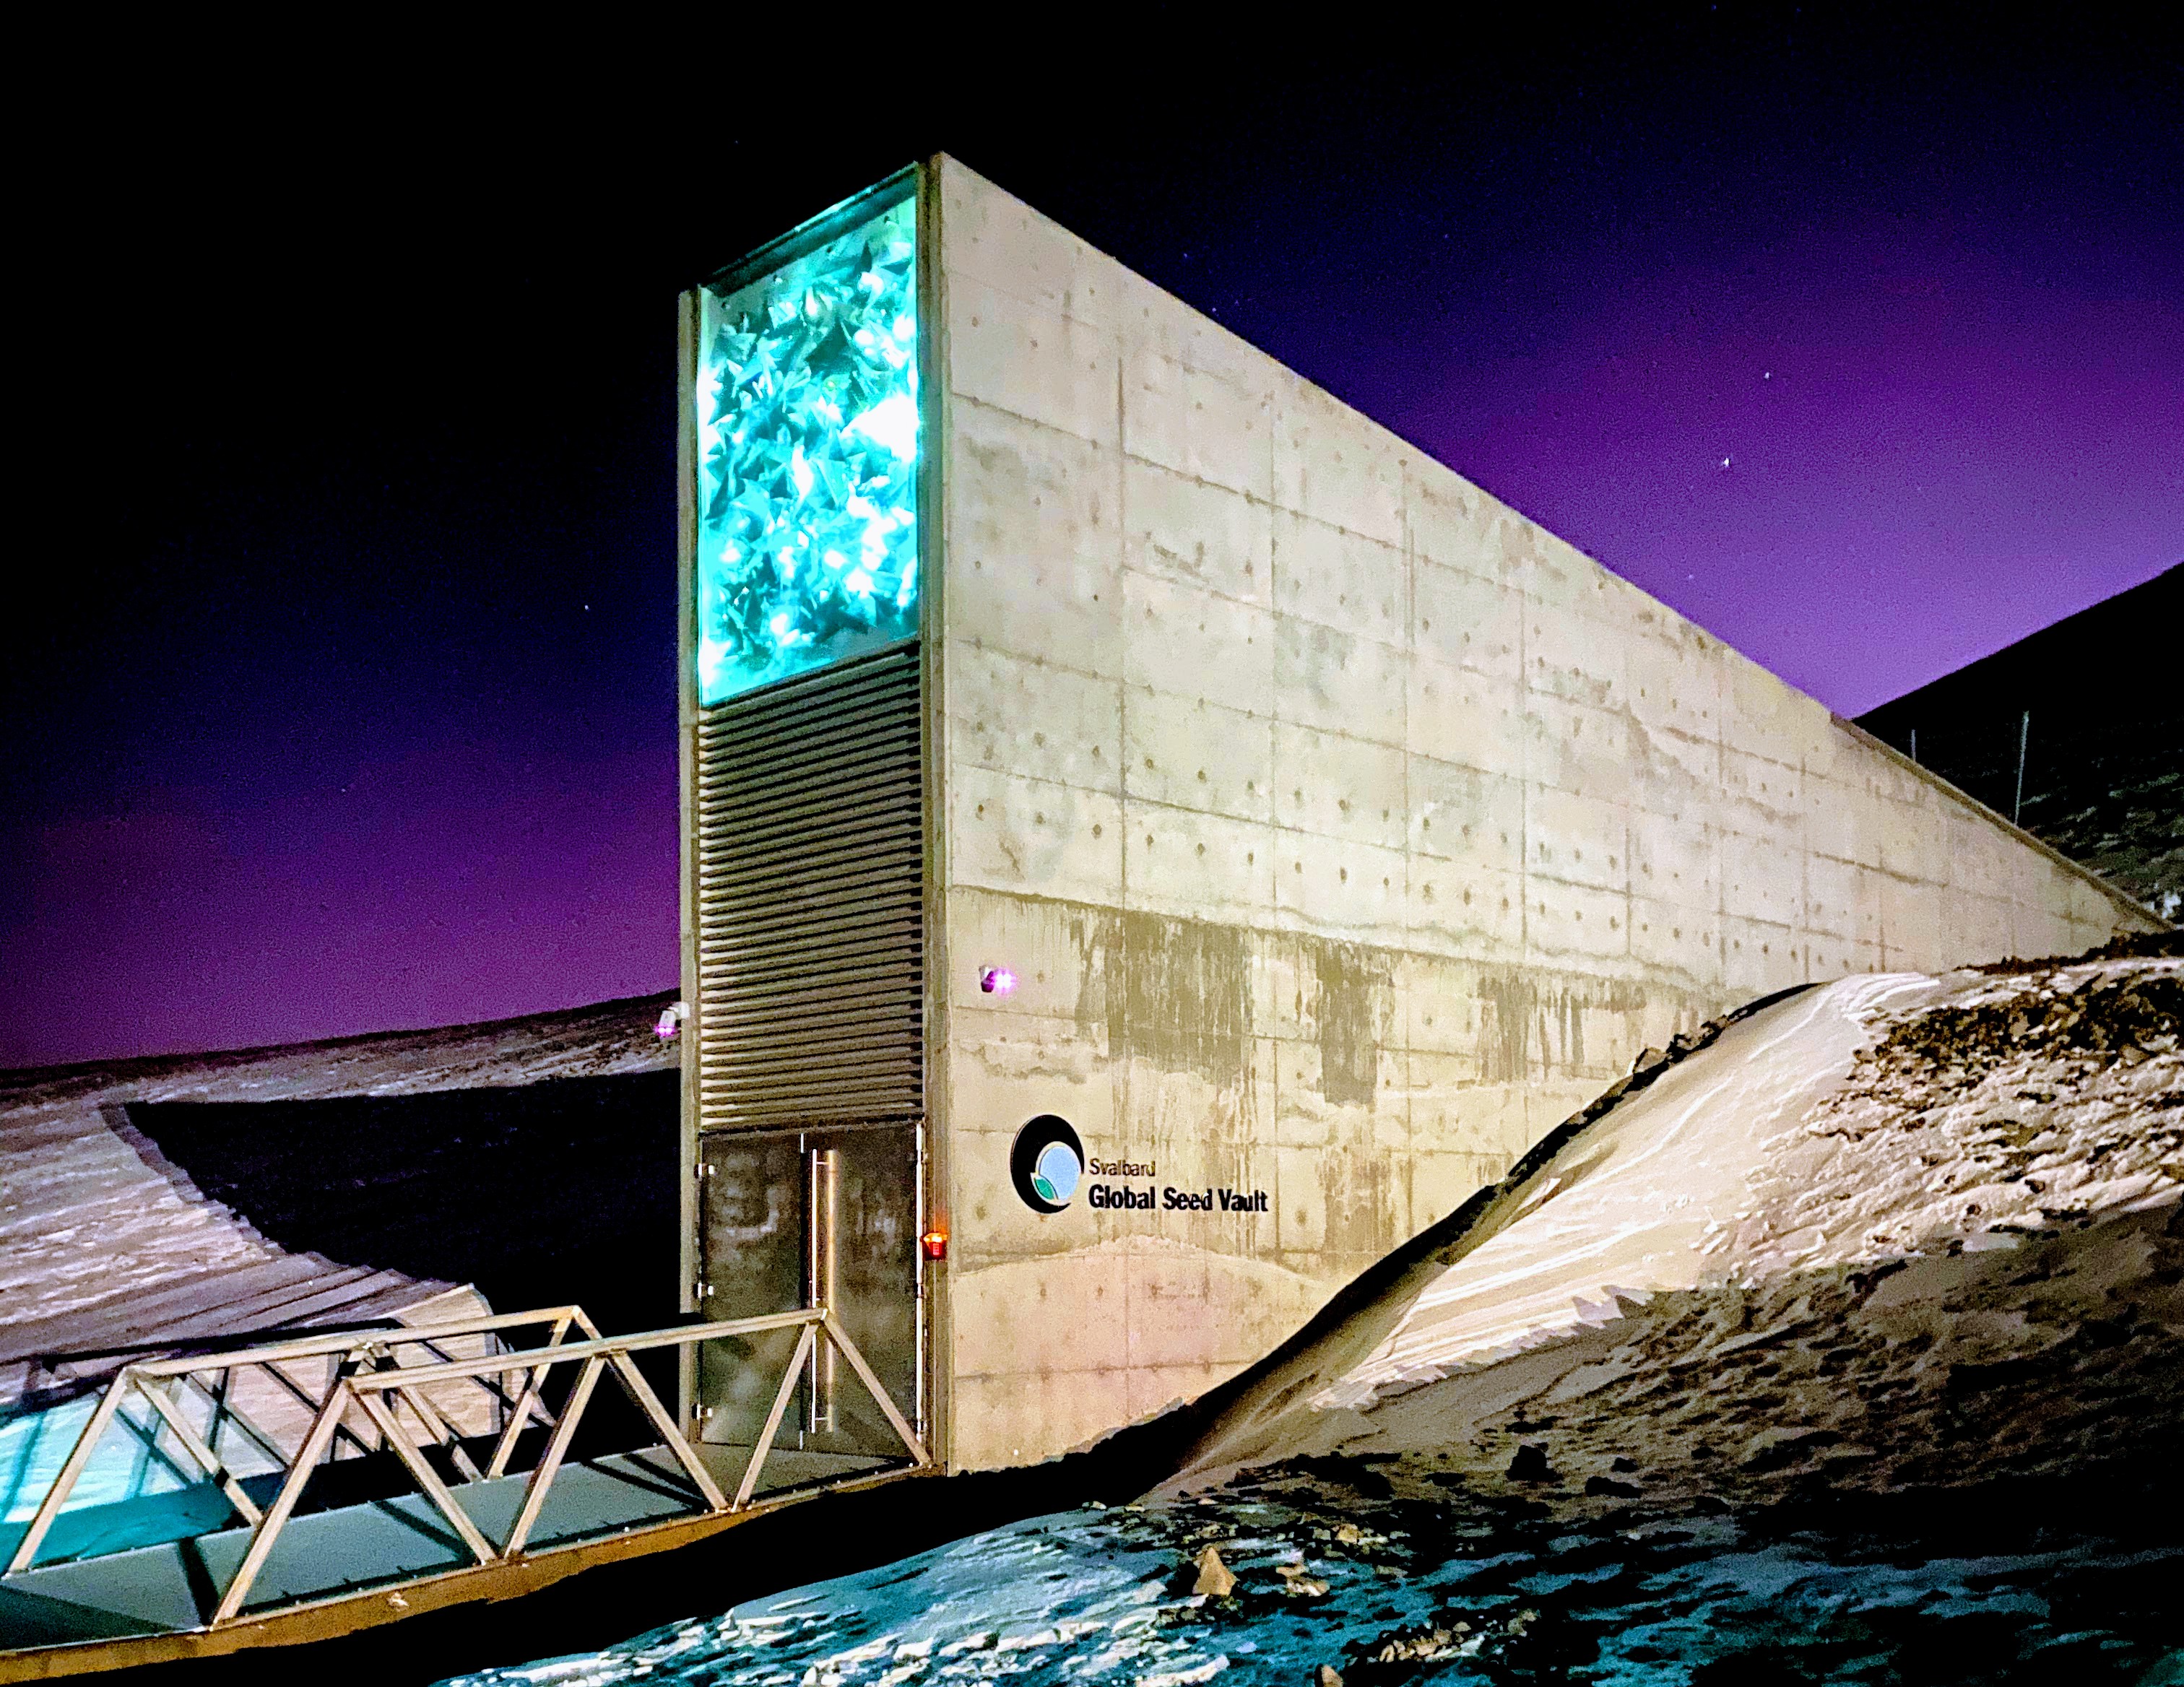 Entrance_to_the_Seed_Vault_(cropped).jpg